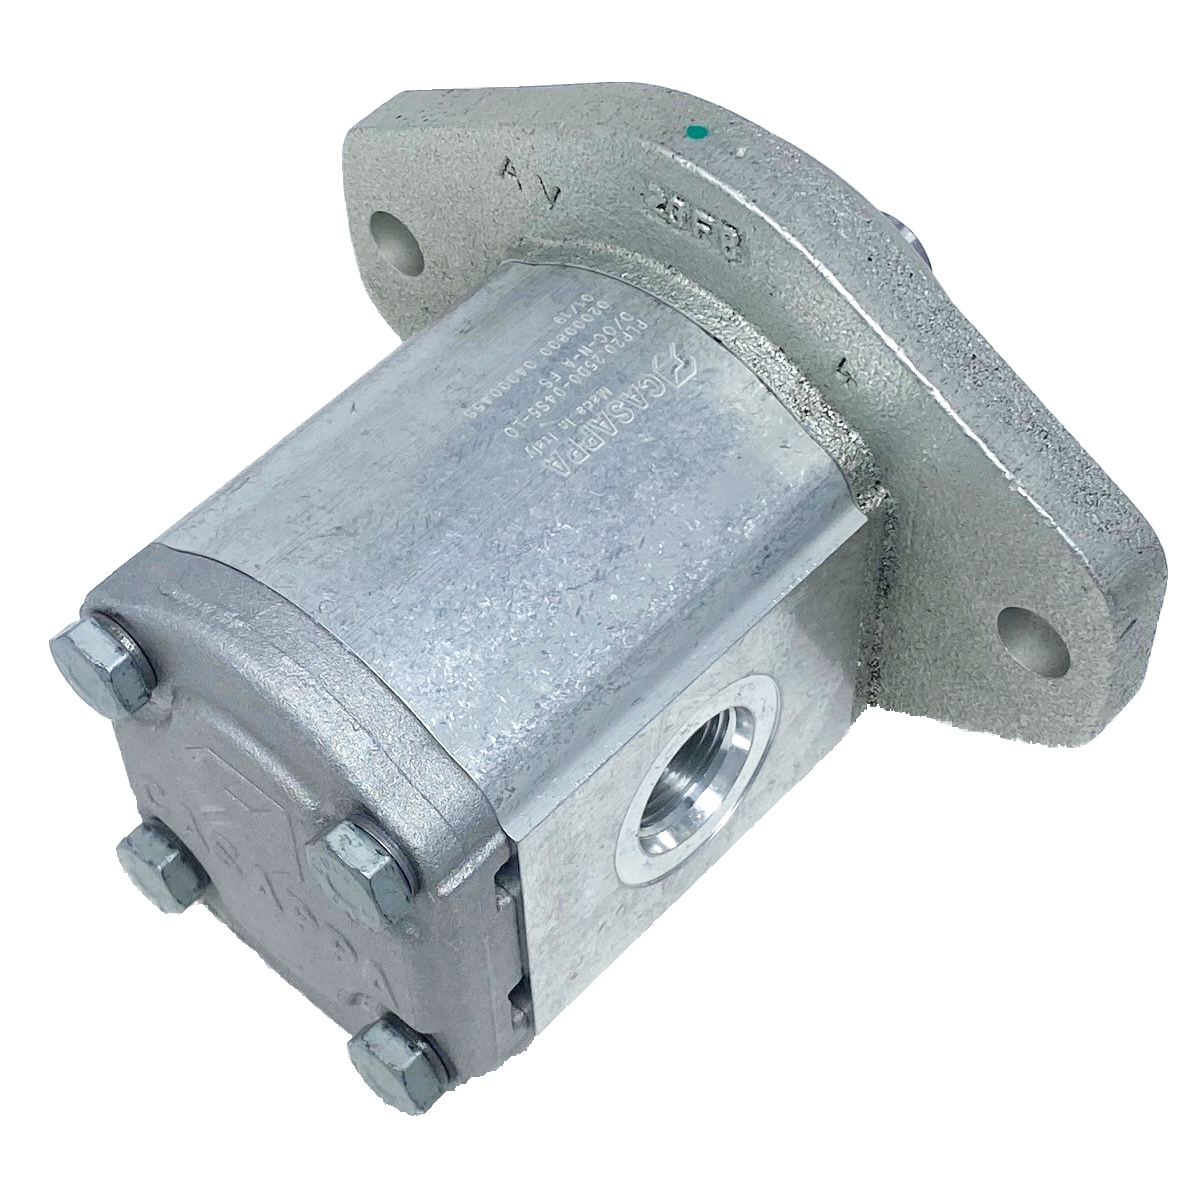 PHM20.31,5B0-32S5-LOC/OG-N-L : Casappa Polaris Gear Motor, 33.03cc, 2900psi, 2500RPM, Reversible Interior Drain, 3/4" Bore x 1/4" Key Shaft, SAE B 2-Bolt Flange, 0.625 (5/8") #10 SAE In, 1.25" #20 SAE Out, Cast Iron Body Cast Iron Flange And Cover